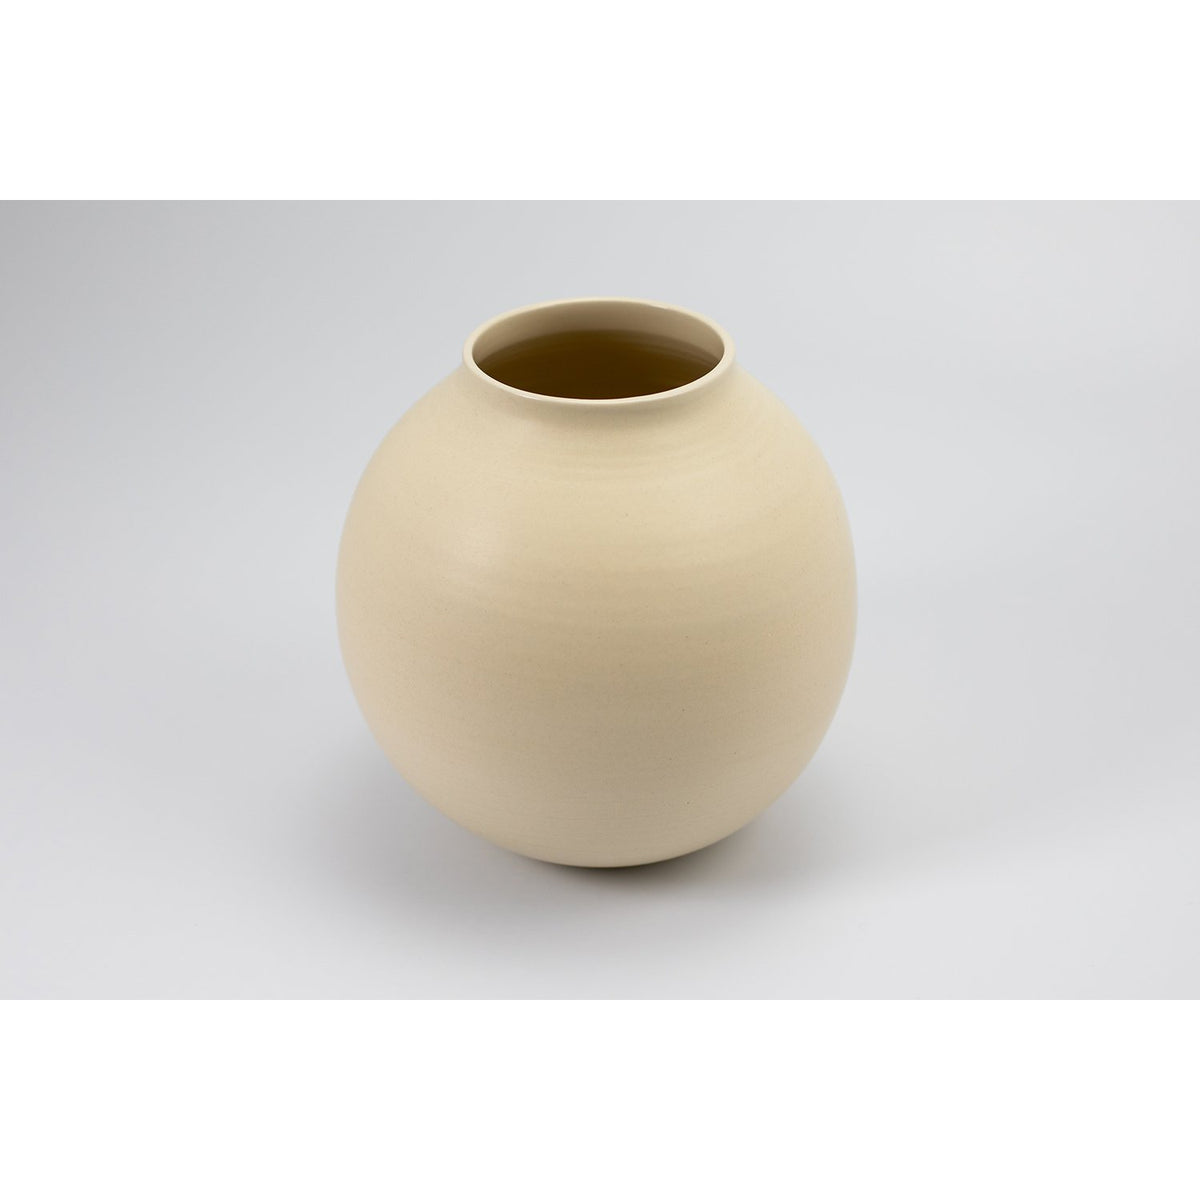 Wheel thrown, ivory moon jar, by Lucy Burley ceramics, available at Padstow Gallery, Cornwall 